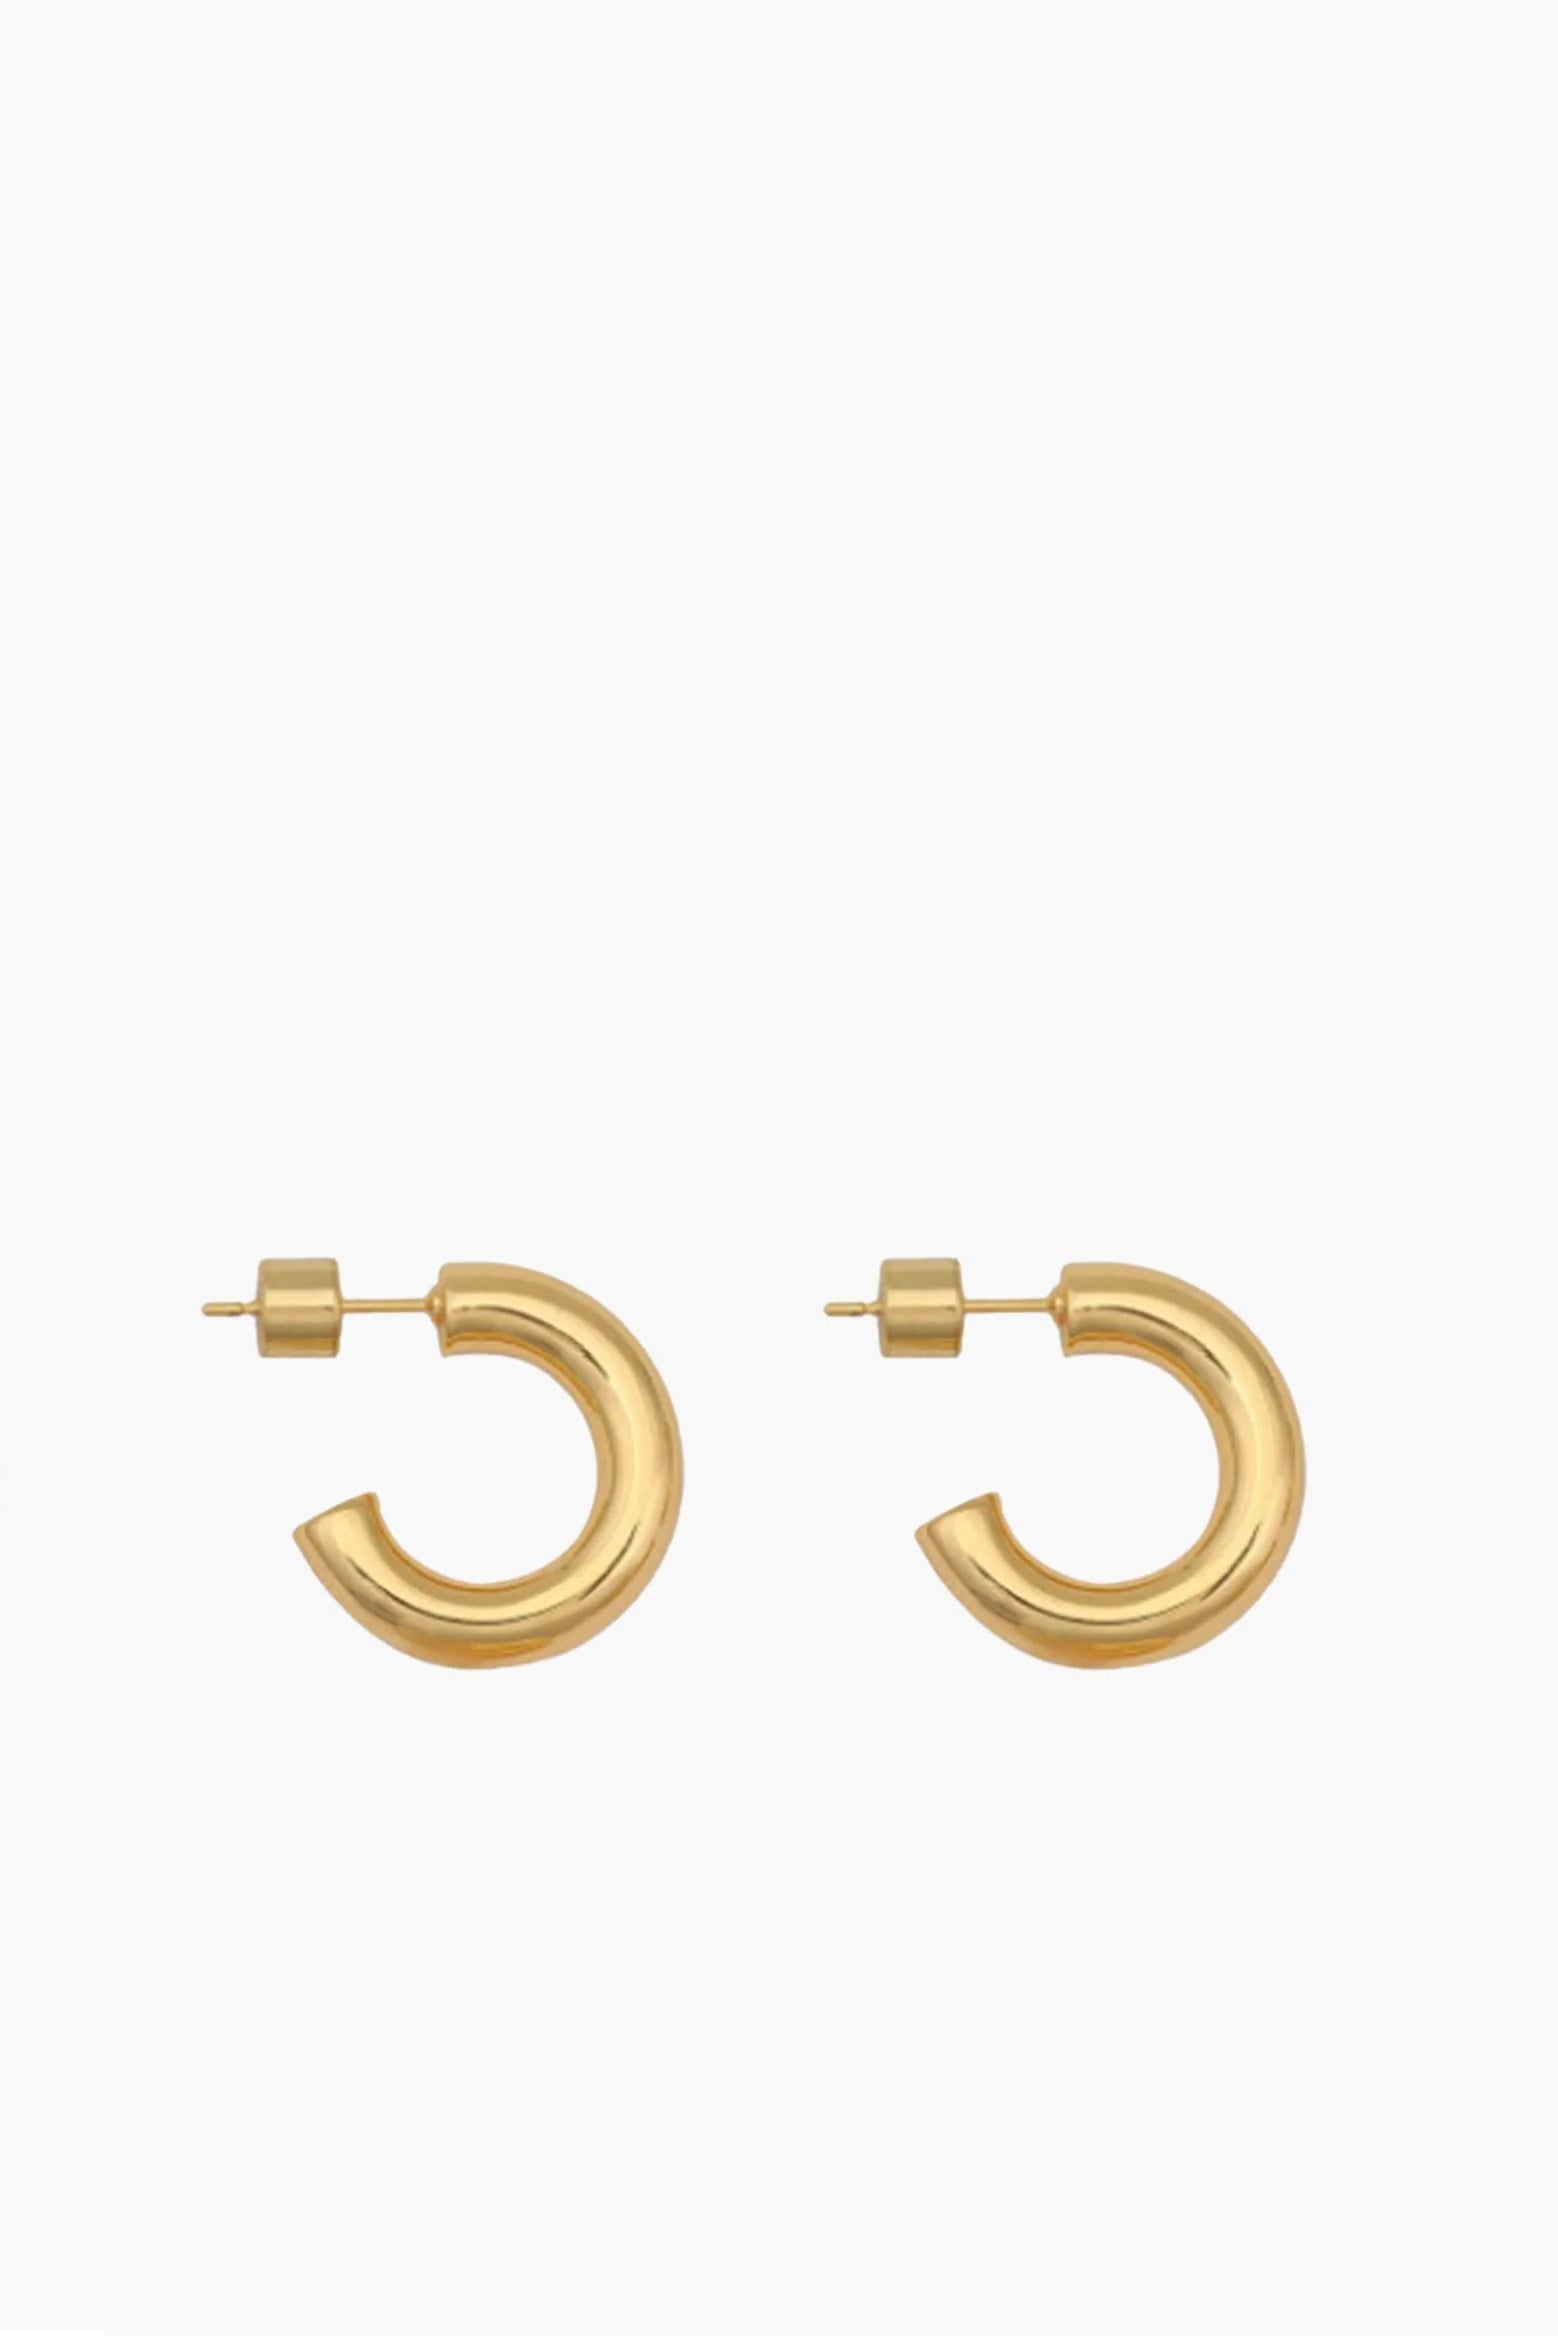 ÈCLATANT Petite Hoop in Gold available at The New Trend Australia.